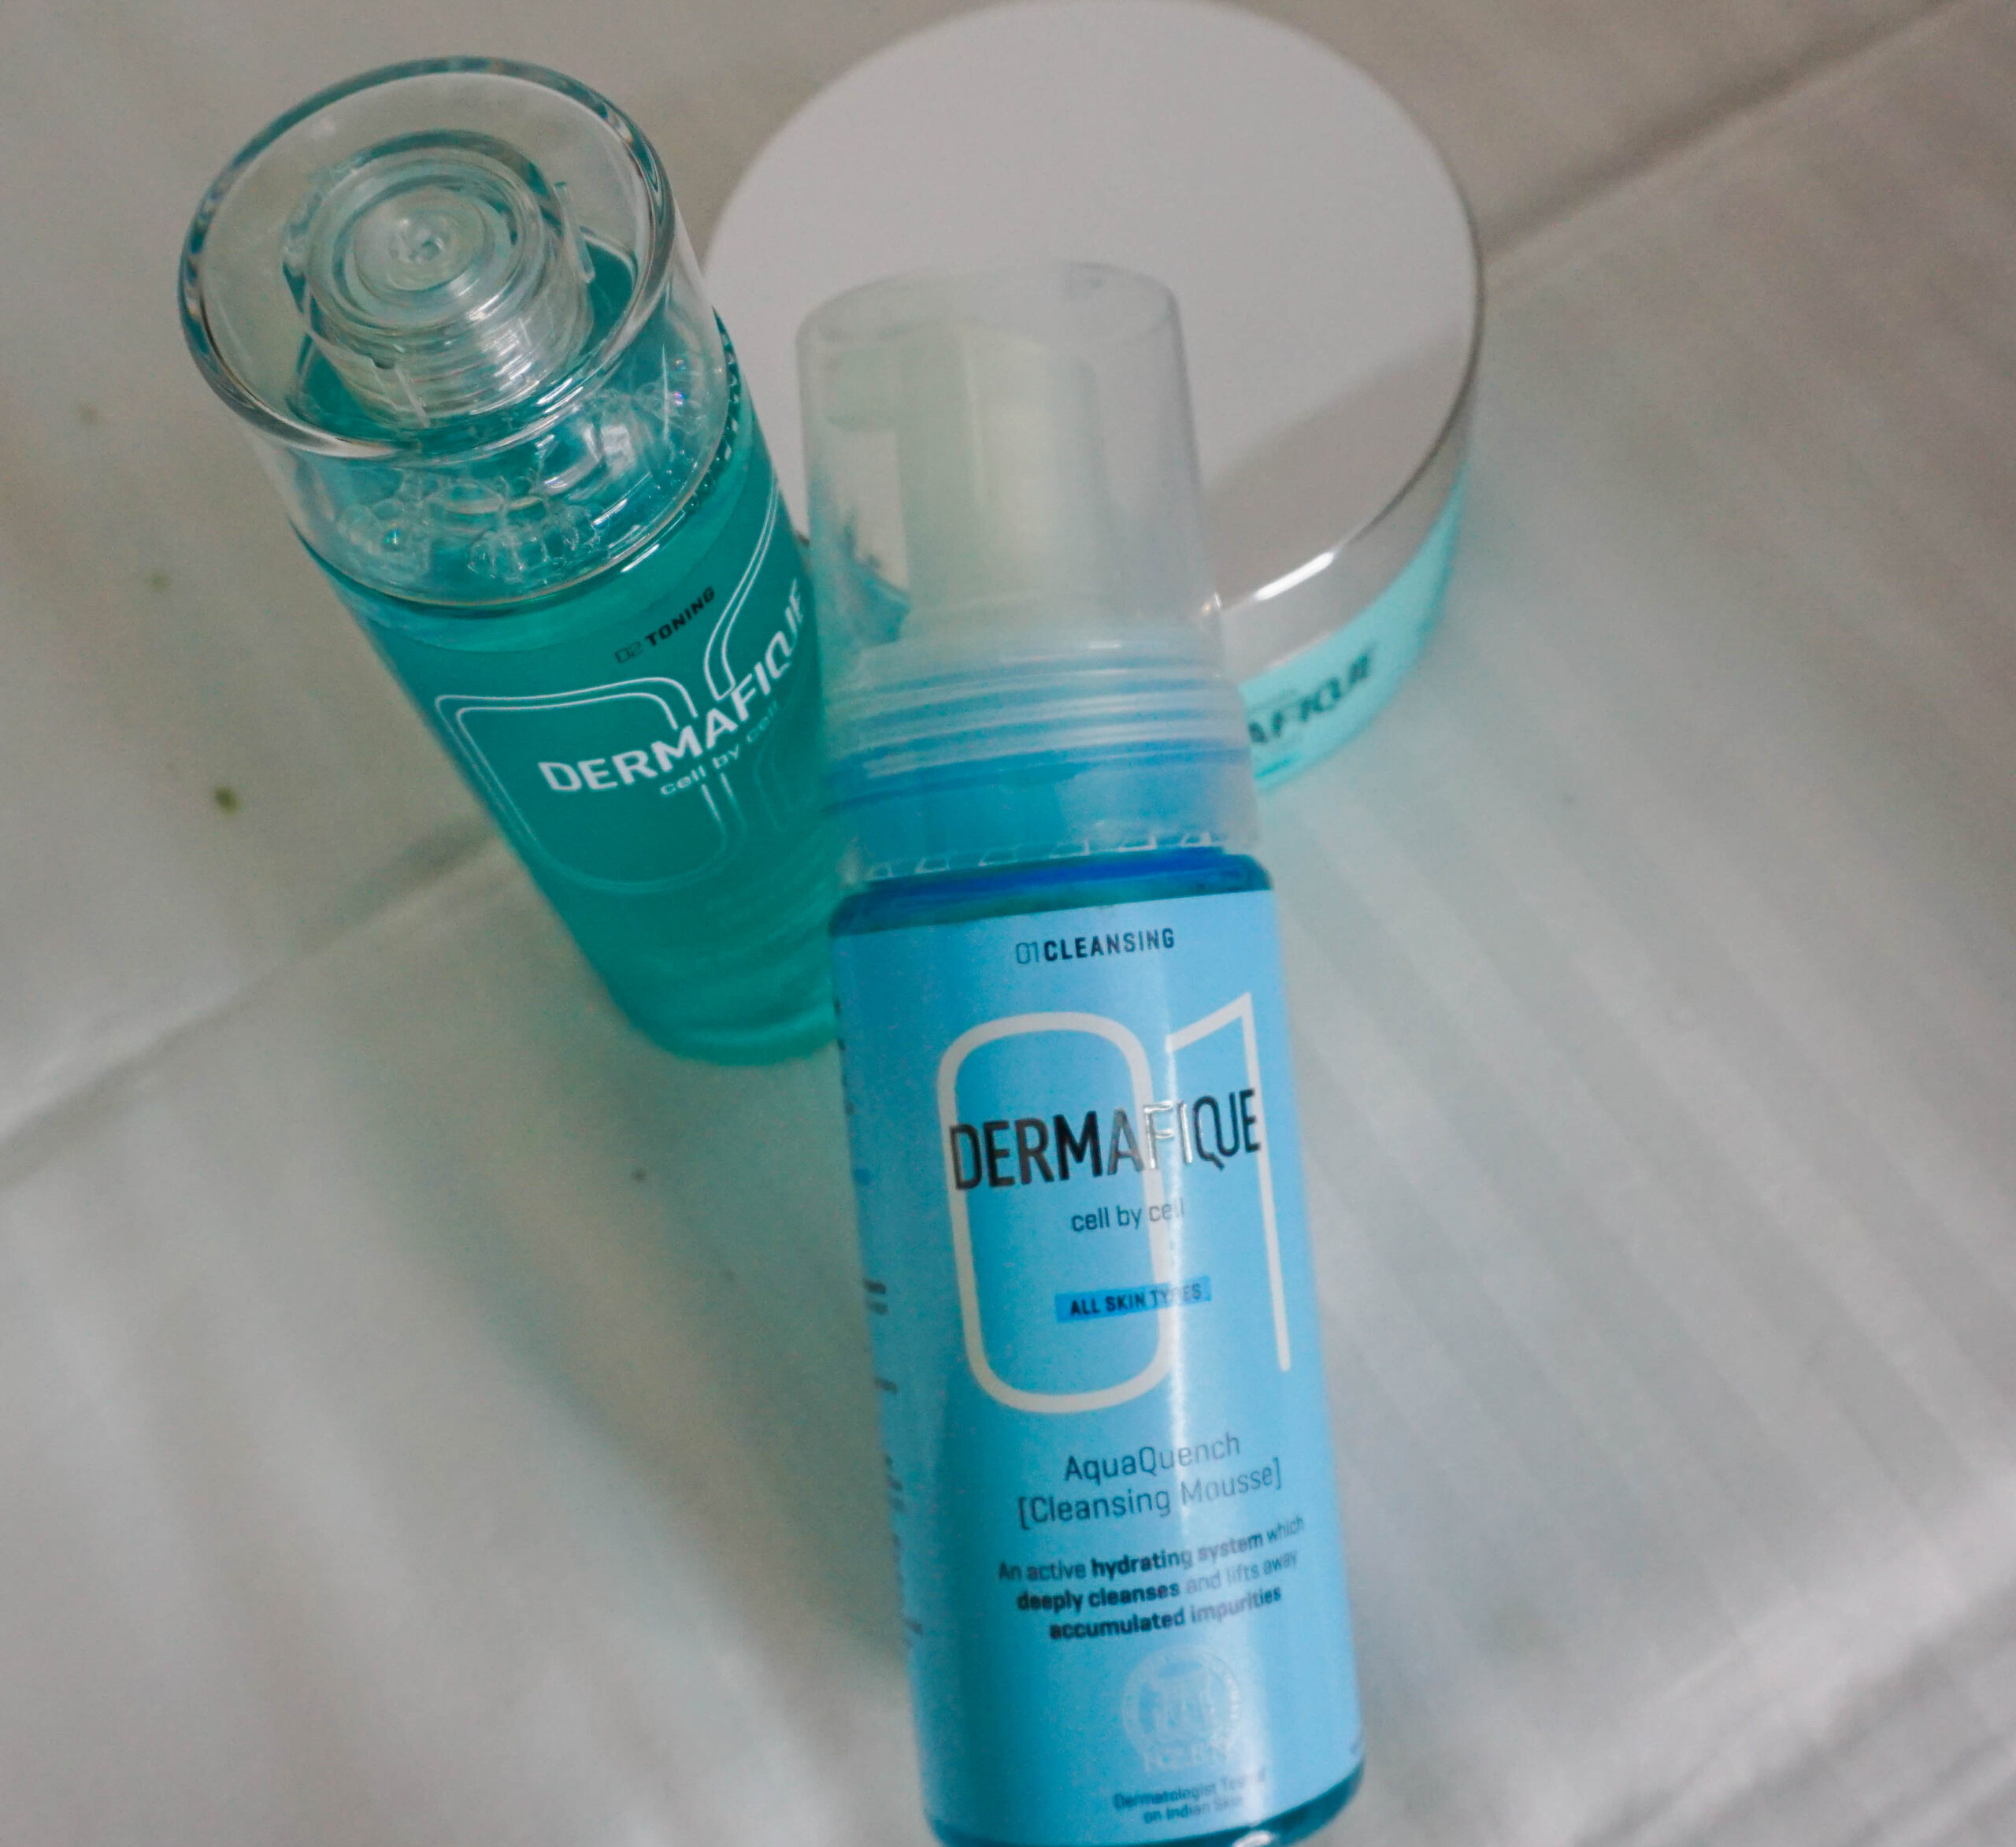 Dermafique Cell by Cell All-important Skin Toner review